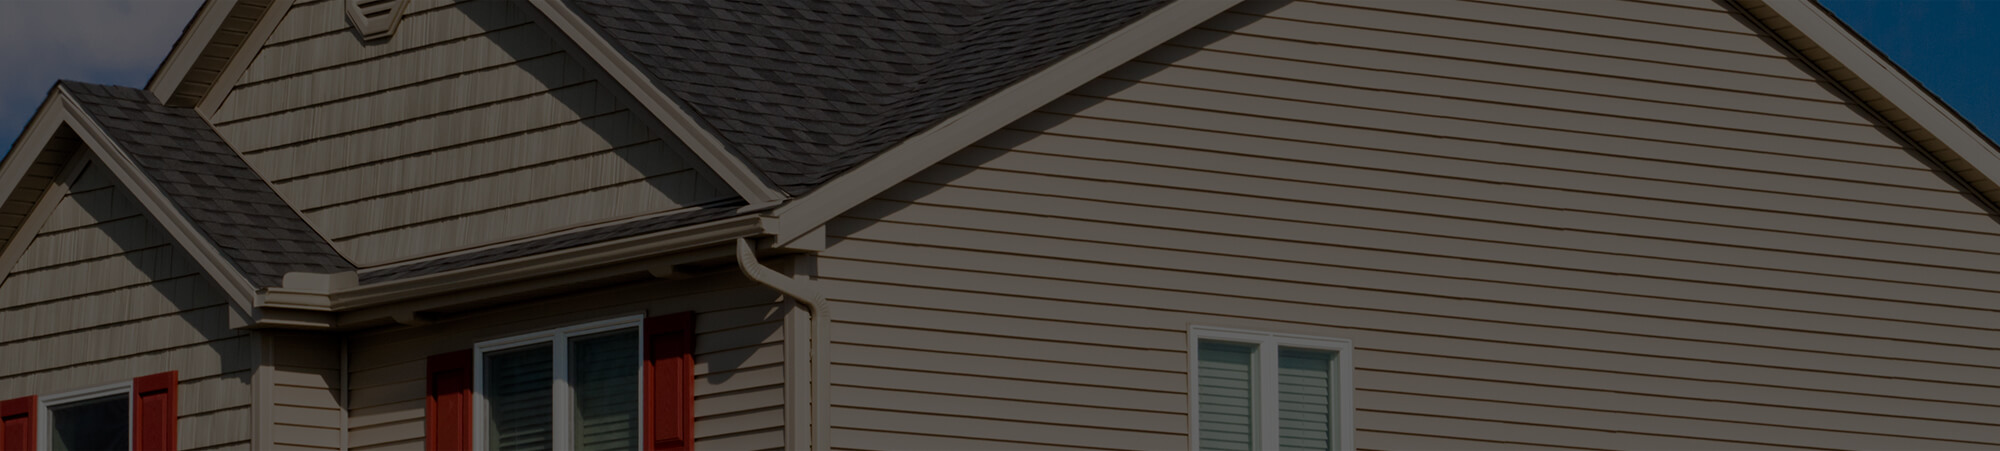 siding installation and replacement services in Kaukauna wi